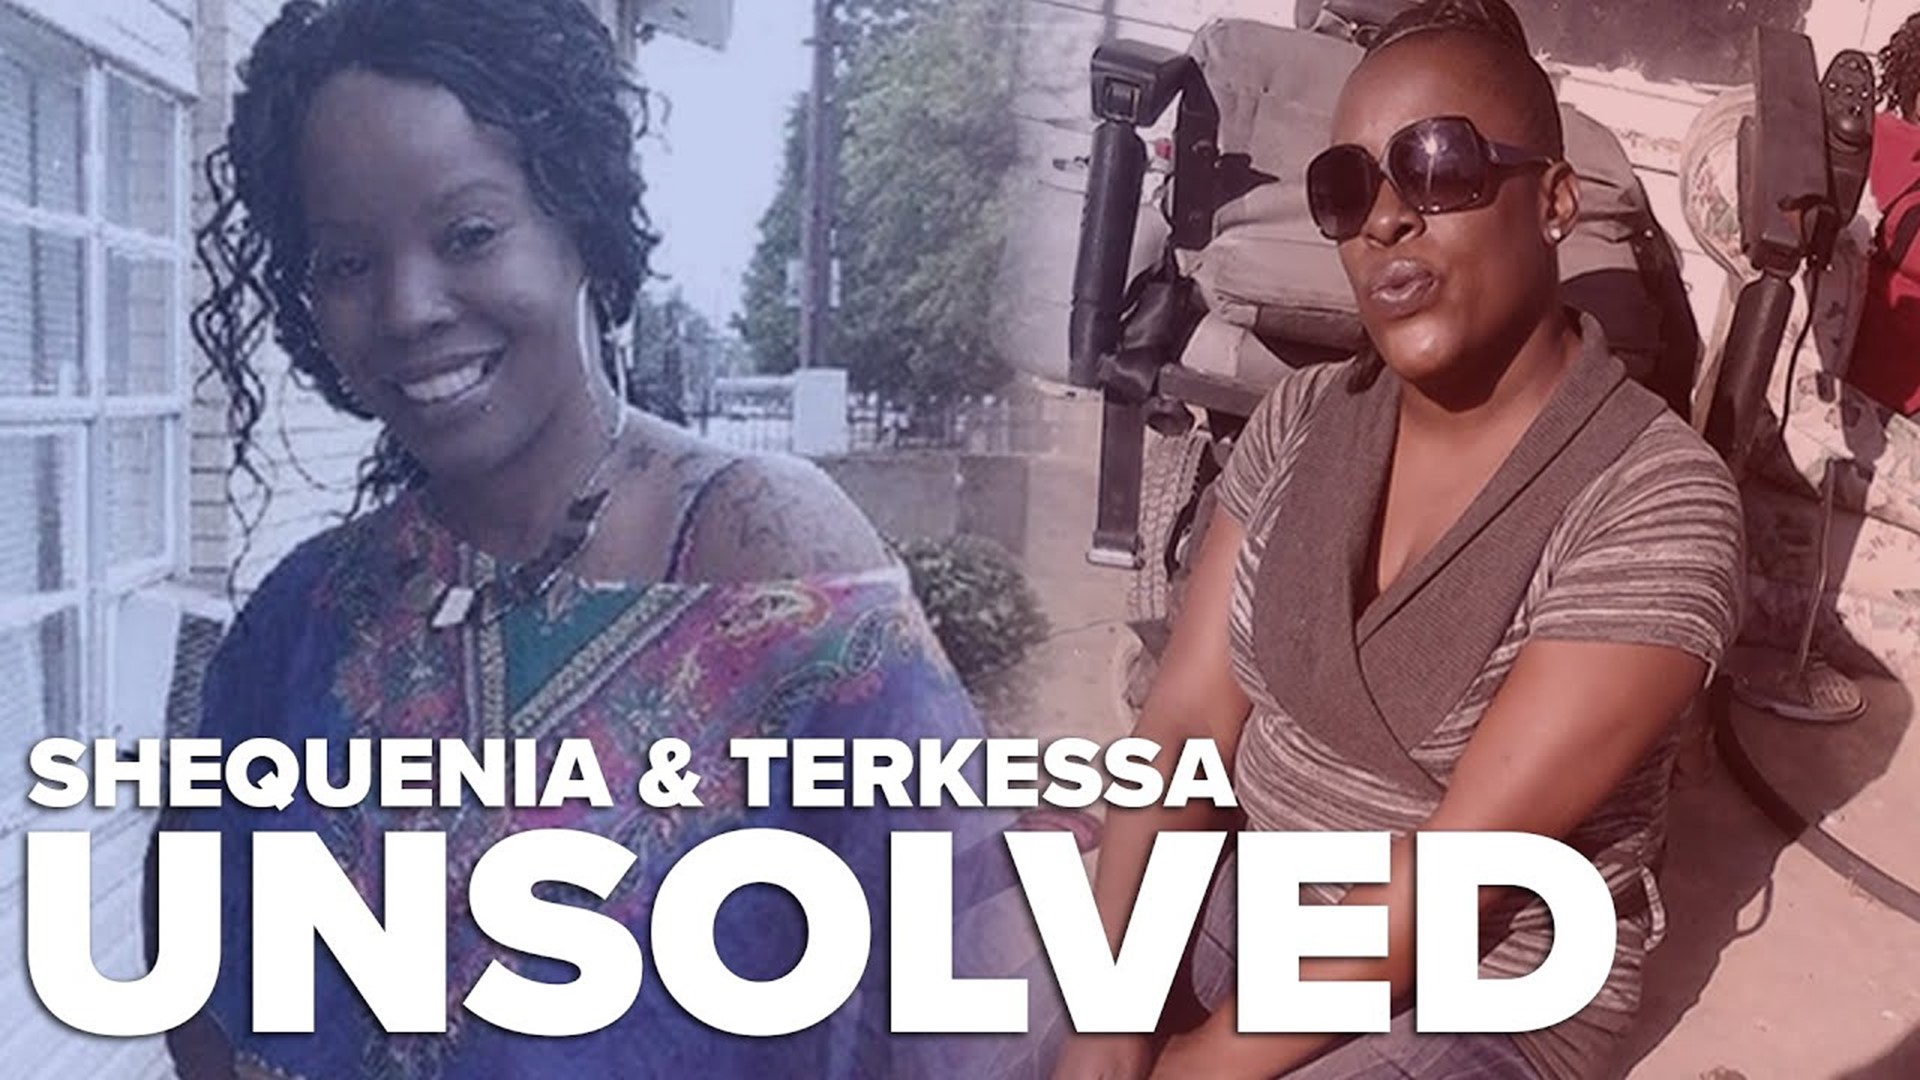 36-year-old Shequenia Burnett and 34-year-old Terkessa Wallace shared their childhood as close friends, growing up together and sharing their lives. Later, they woul